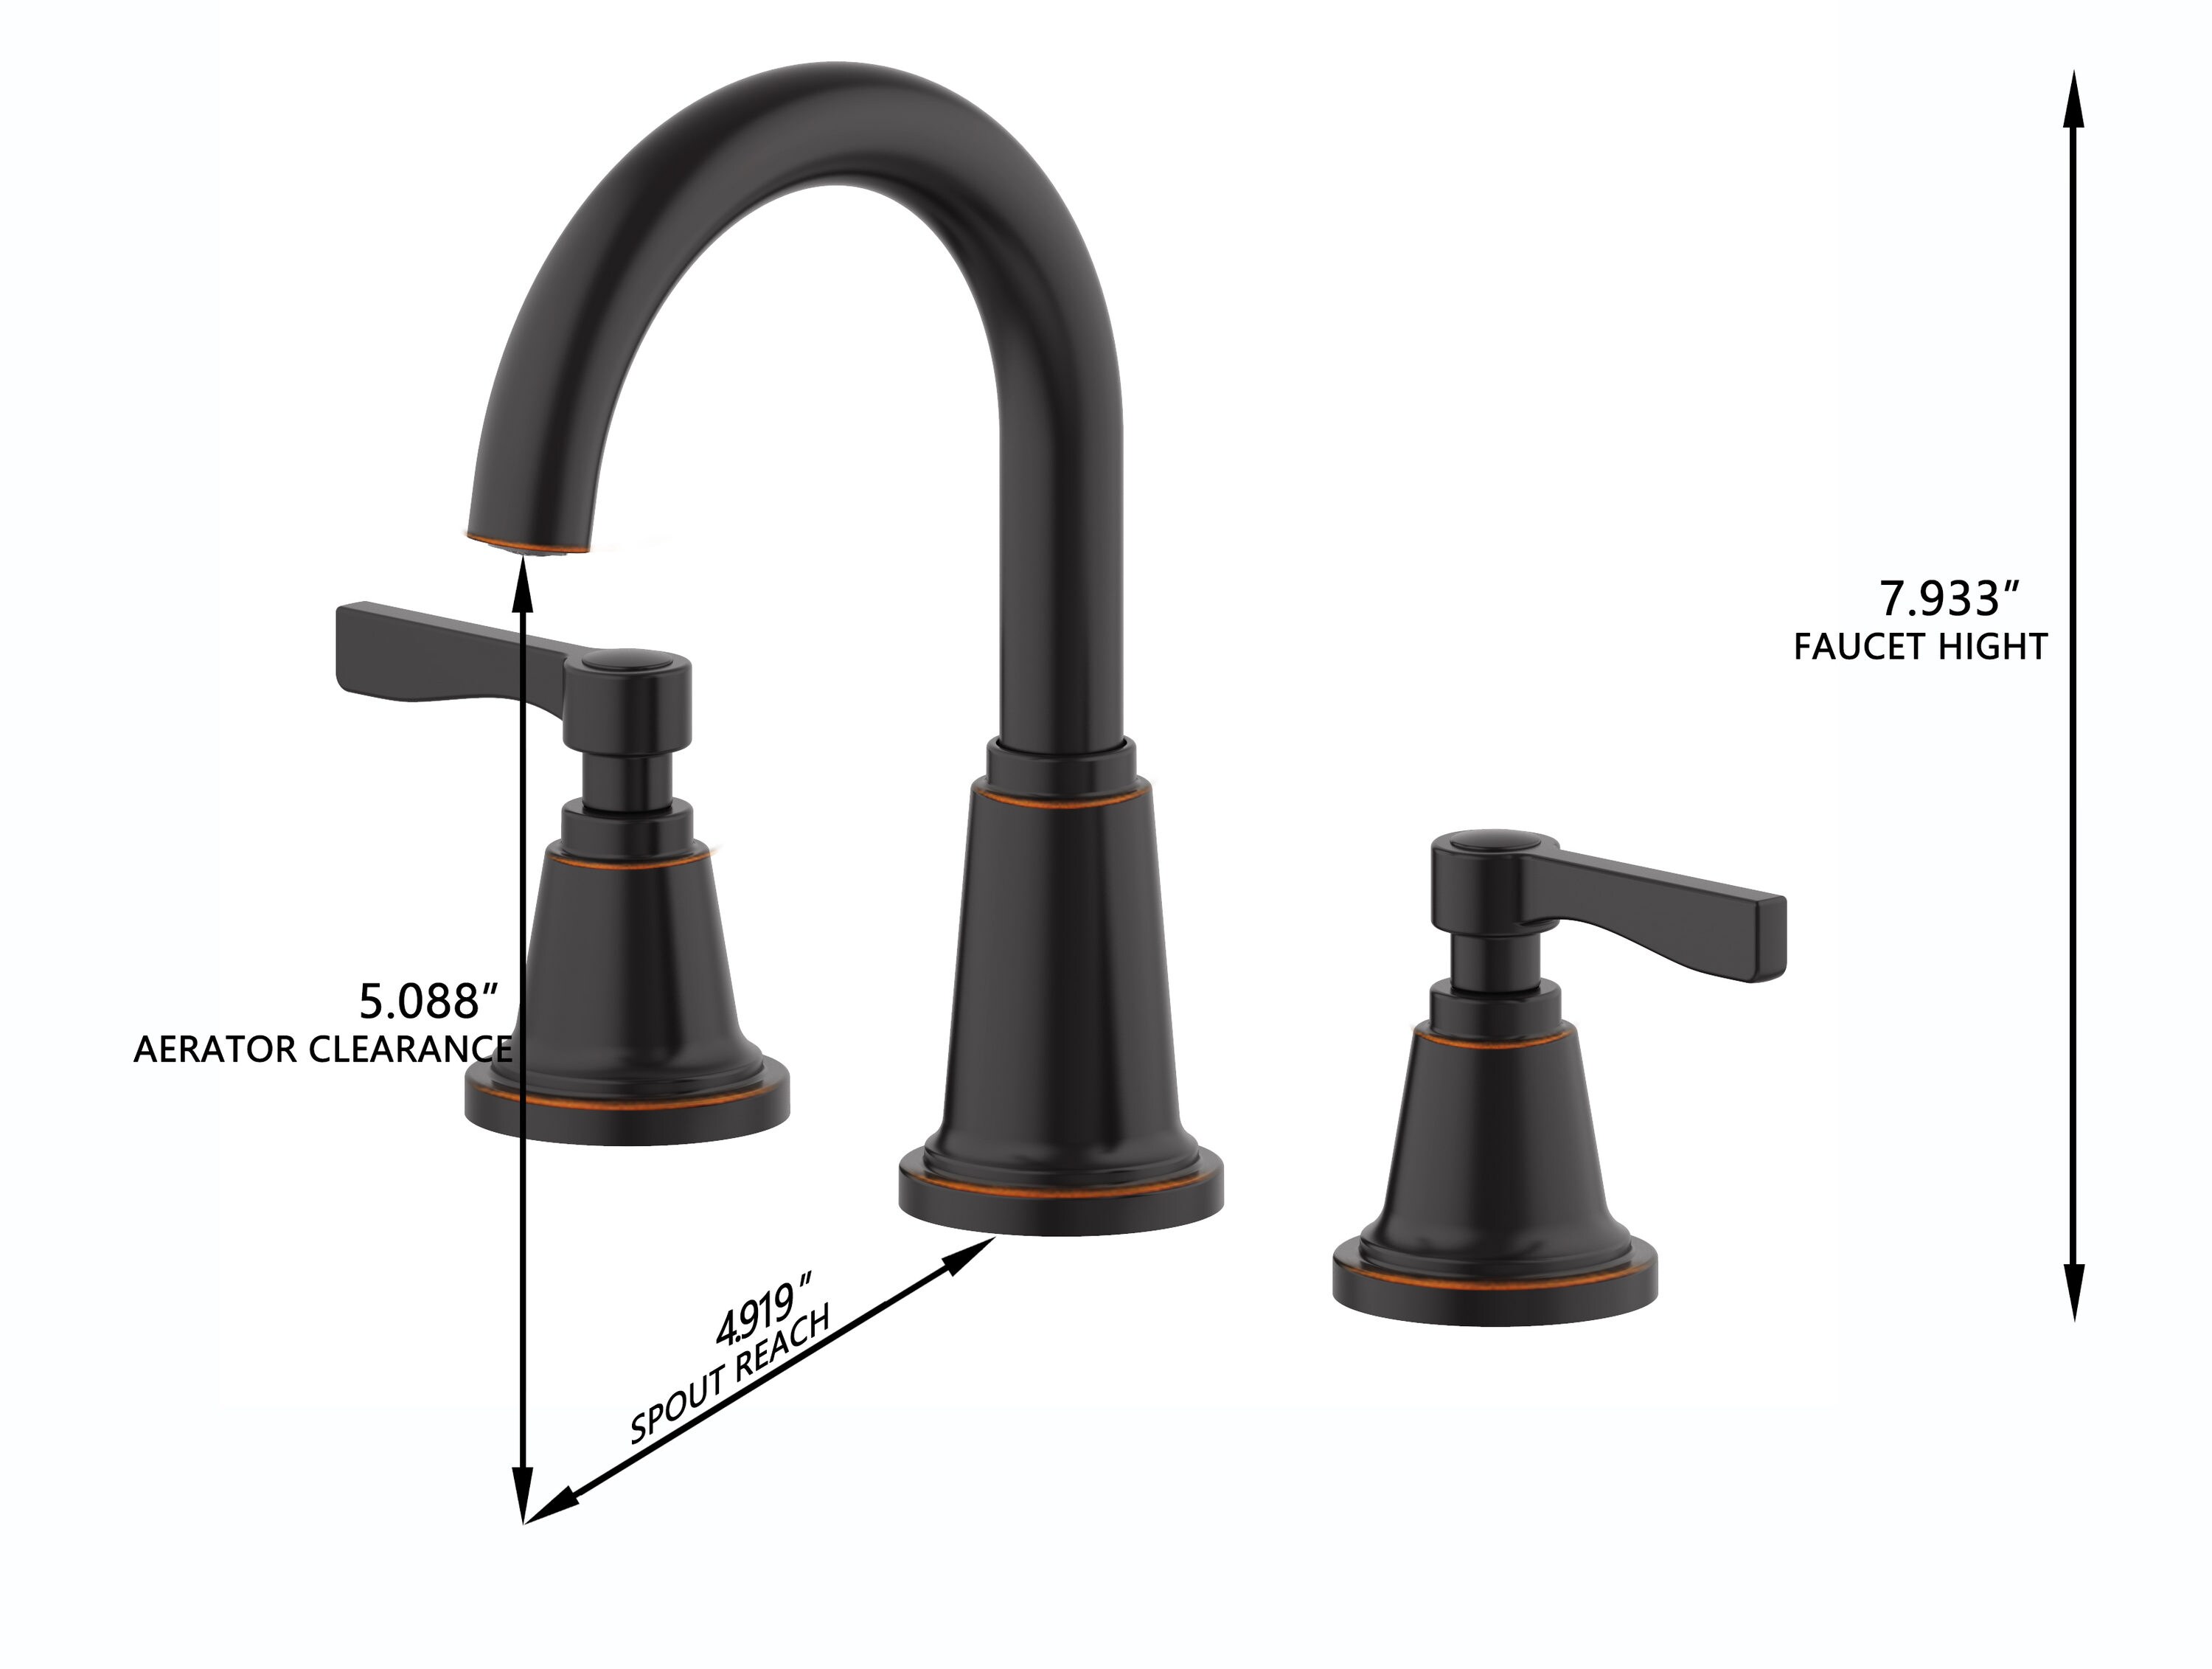 Bathroom Faucet 2 Handle Oil Rubbed Bronze Set with Pop-up Drain and Water Hoses 